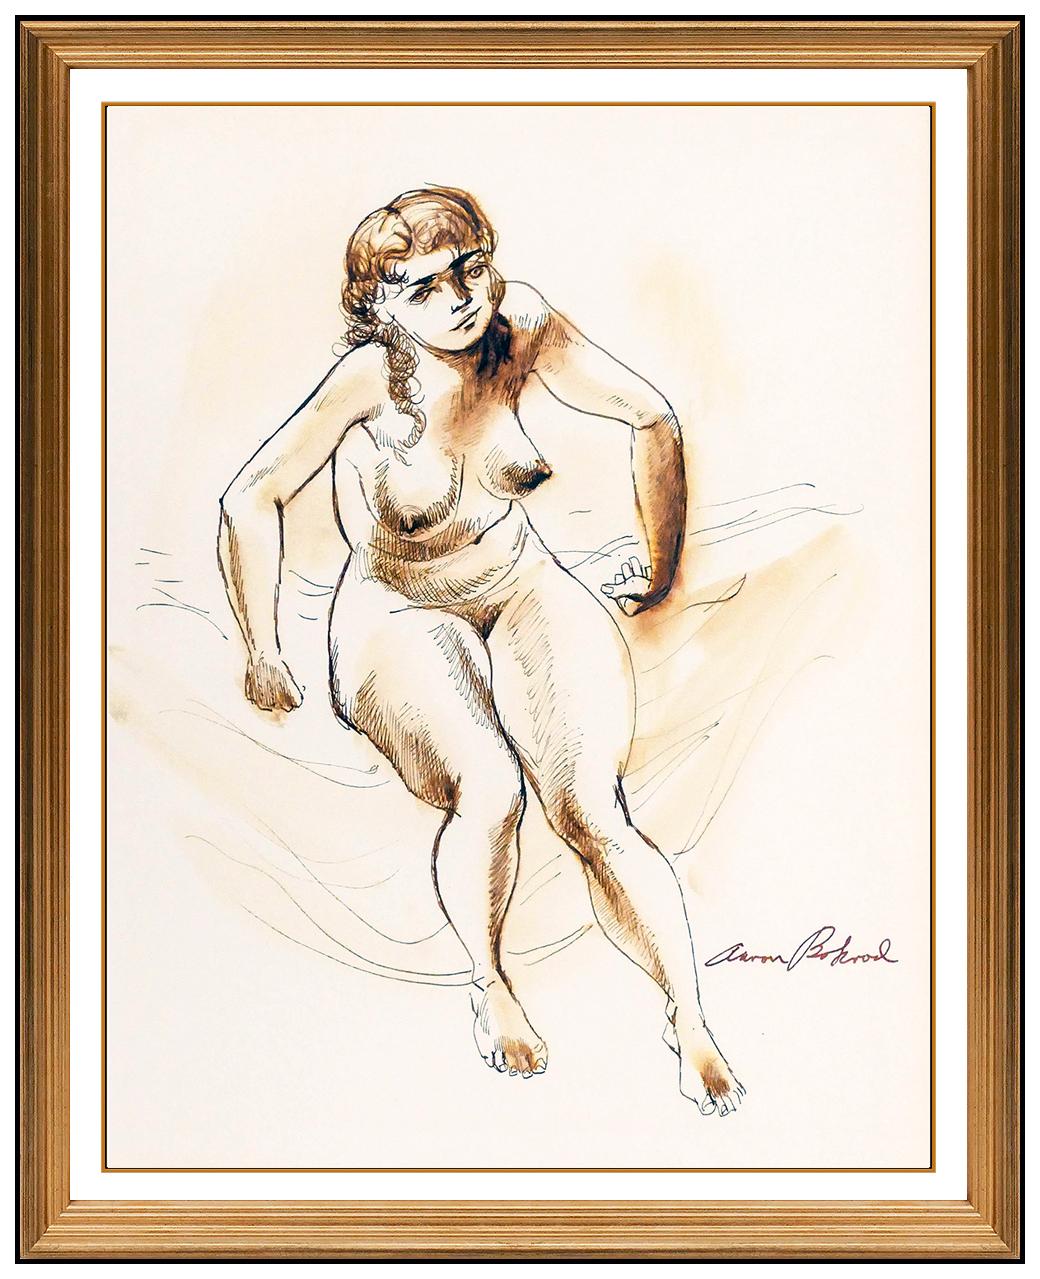 Artist: Aaron Bohrod
Title: Crying Nude Original
Medium: Original Watercolor Painting
Size: 12 x 9.5"
Frame: 19 x 16.5"
Published on page 183 of "Aaron Bohrod: Figure Sketches"